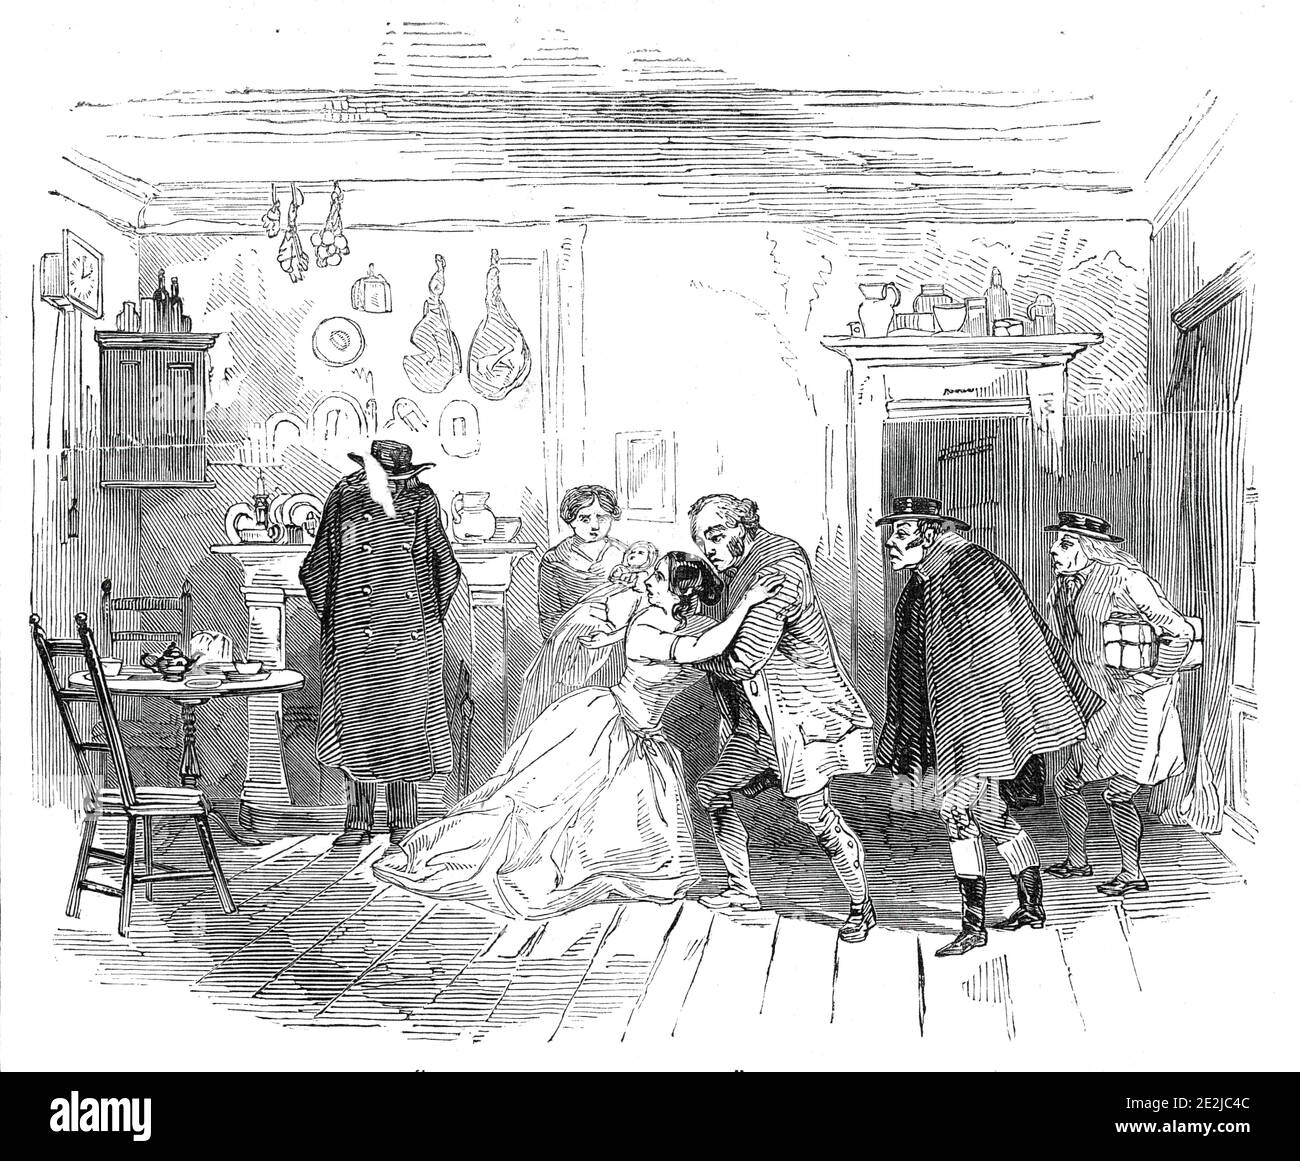 Scene from &quot;The Cricket on the Hearth&quot;, at the Lyceum Theatre, 1845. London stage production of '... Mr. [Charles] Dickens's new Christmas book, &quot;The Cricket on the Hearth,&quot; dramatised by Mr. Albert Smith...it is long since we have witnessed such enthusiasm as that evinced by the audience upon the fall of the curtain...The cast was as follows: John Peerybingle, Mr. Emery; Tacklelon (the toy merchant), Mr. Meadows: Caleb Plummer, Mr. Keeley; The Stranger, Mr. F. Vining ; Dot, Mrs. Keeley; Bertha, Miss Mary Keeley (her first appearance on any stage); Tilly Slowboy, Miss Turne Stock Photo